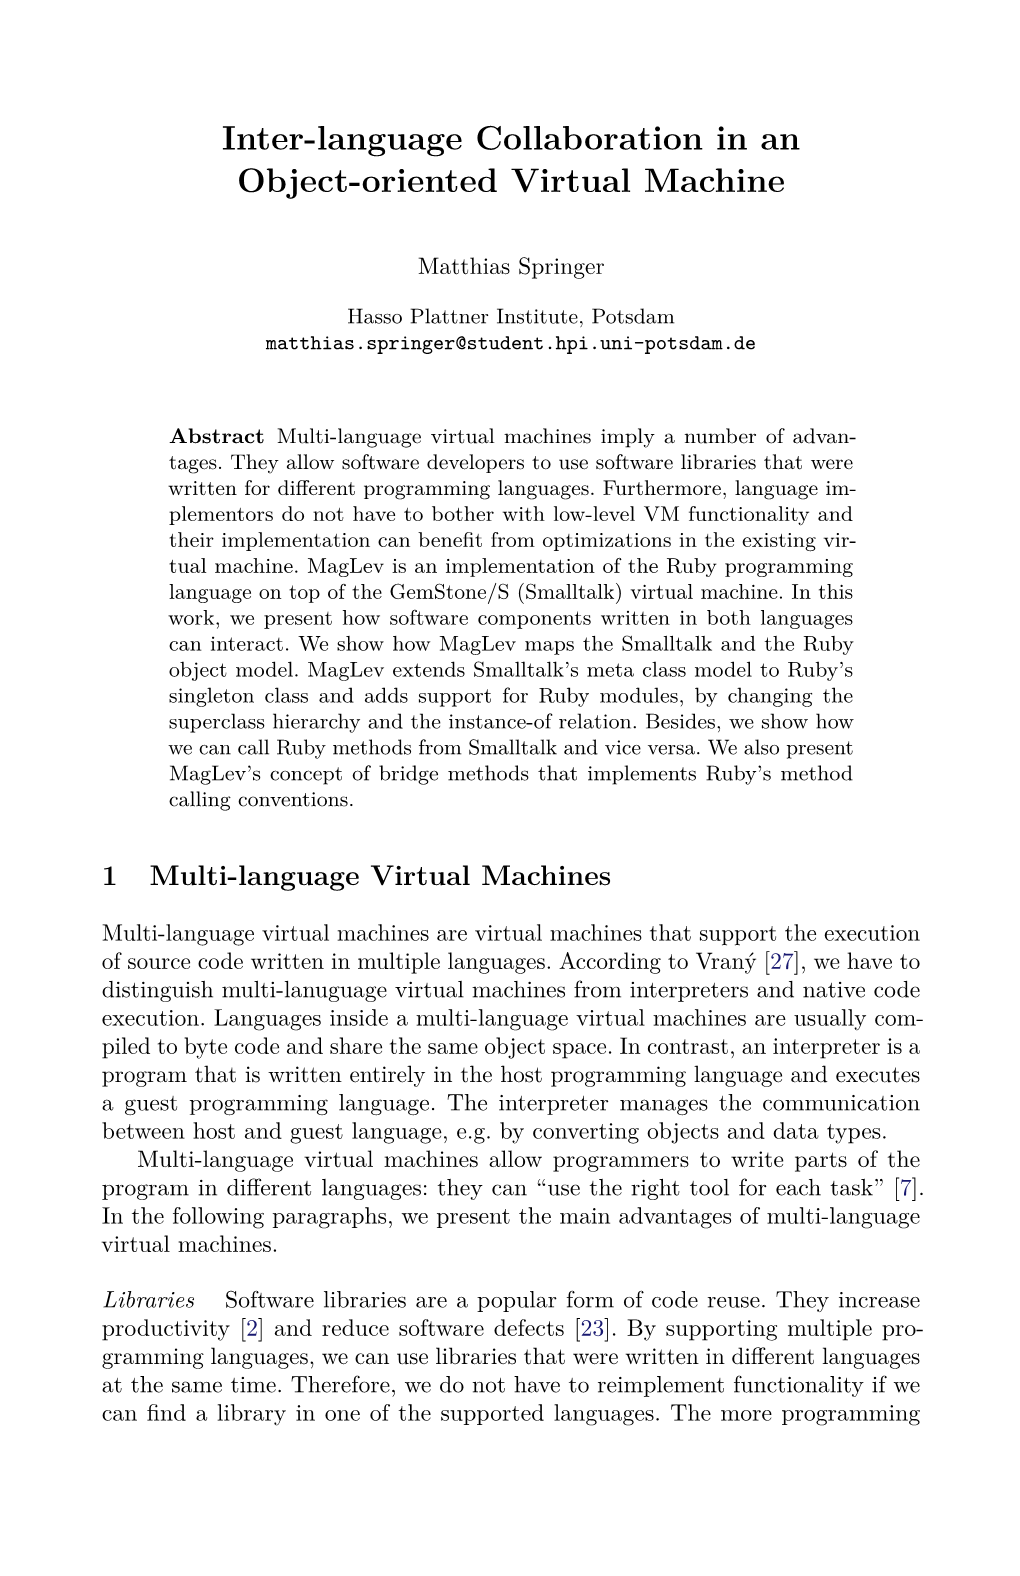 Inter-Language Collaboration in an Object-Oriented Virtual Machine